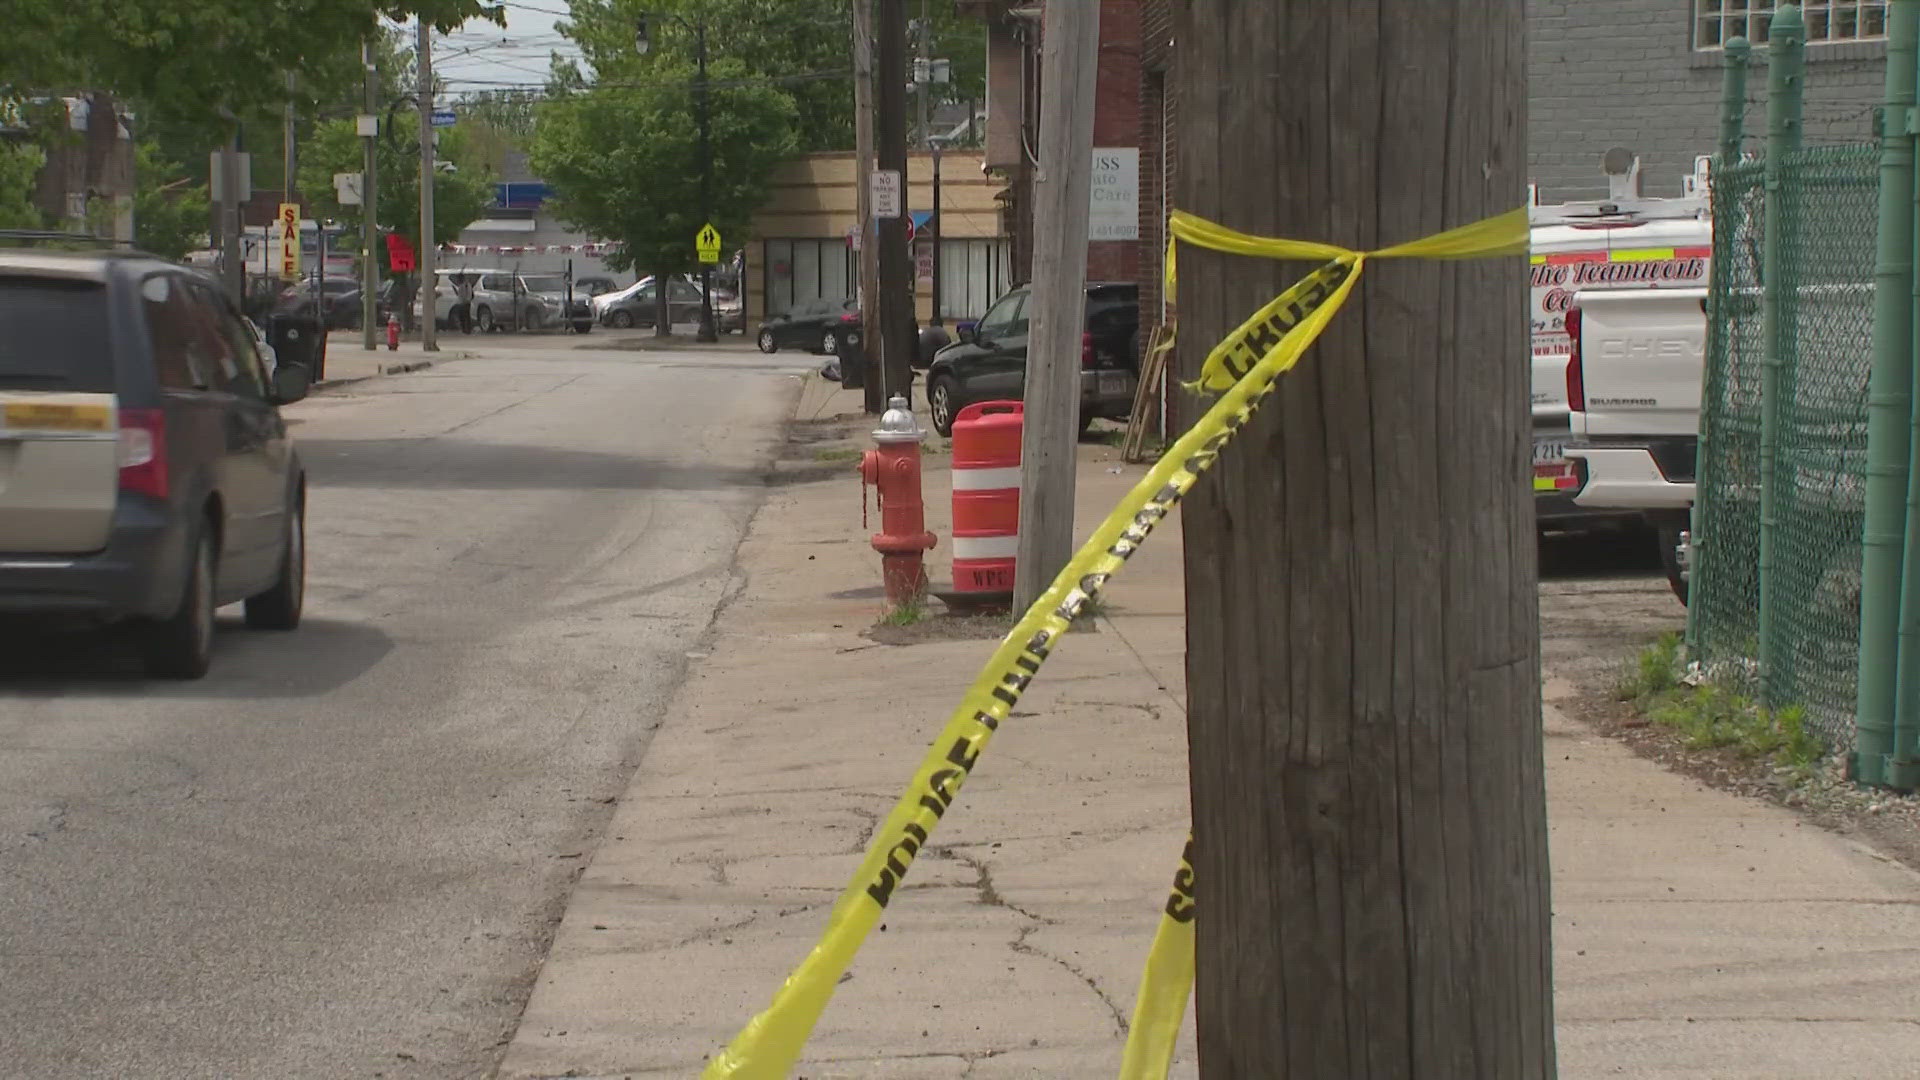 Cleveland police say the man who died was approximately 27 years old.